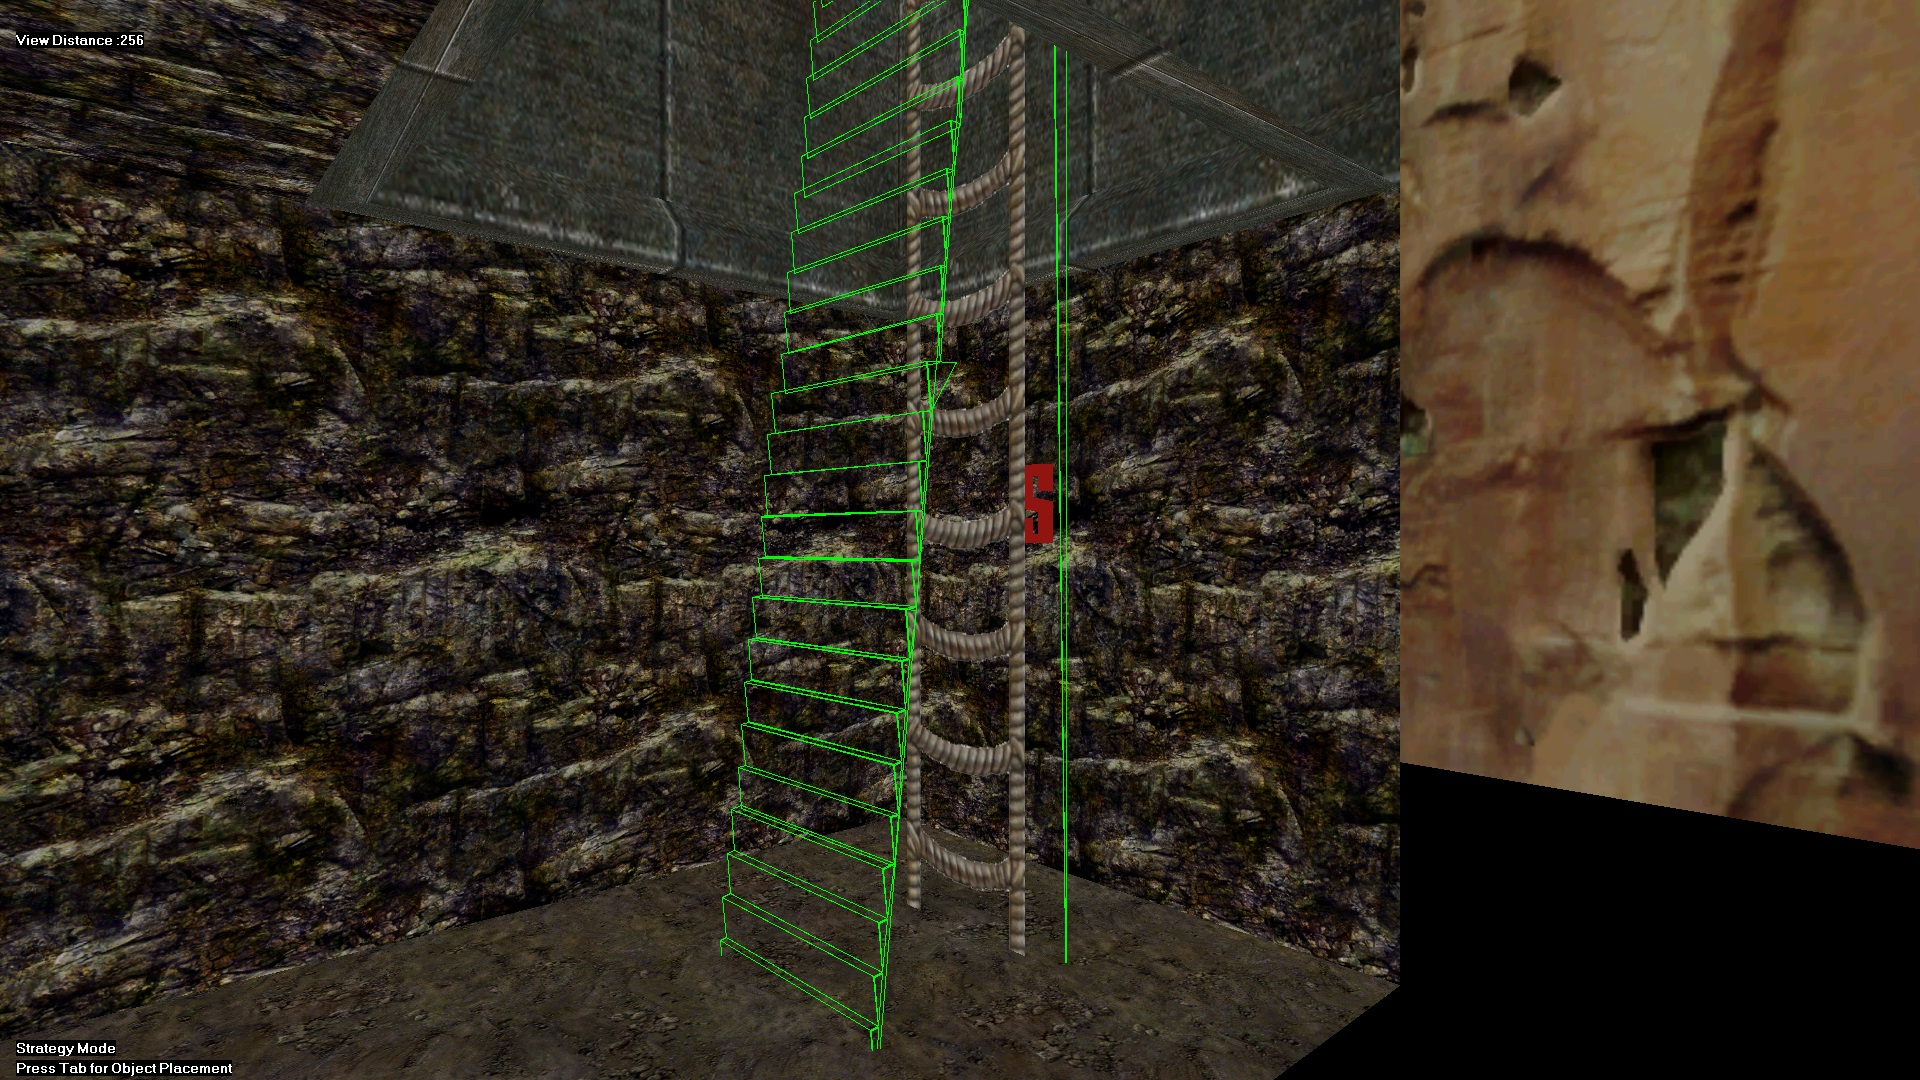 An image showing an invisible helper object to scale ladders by jumping into them